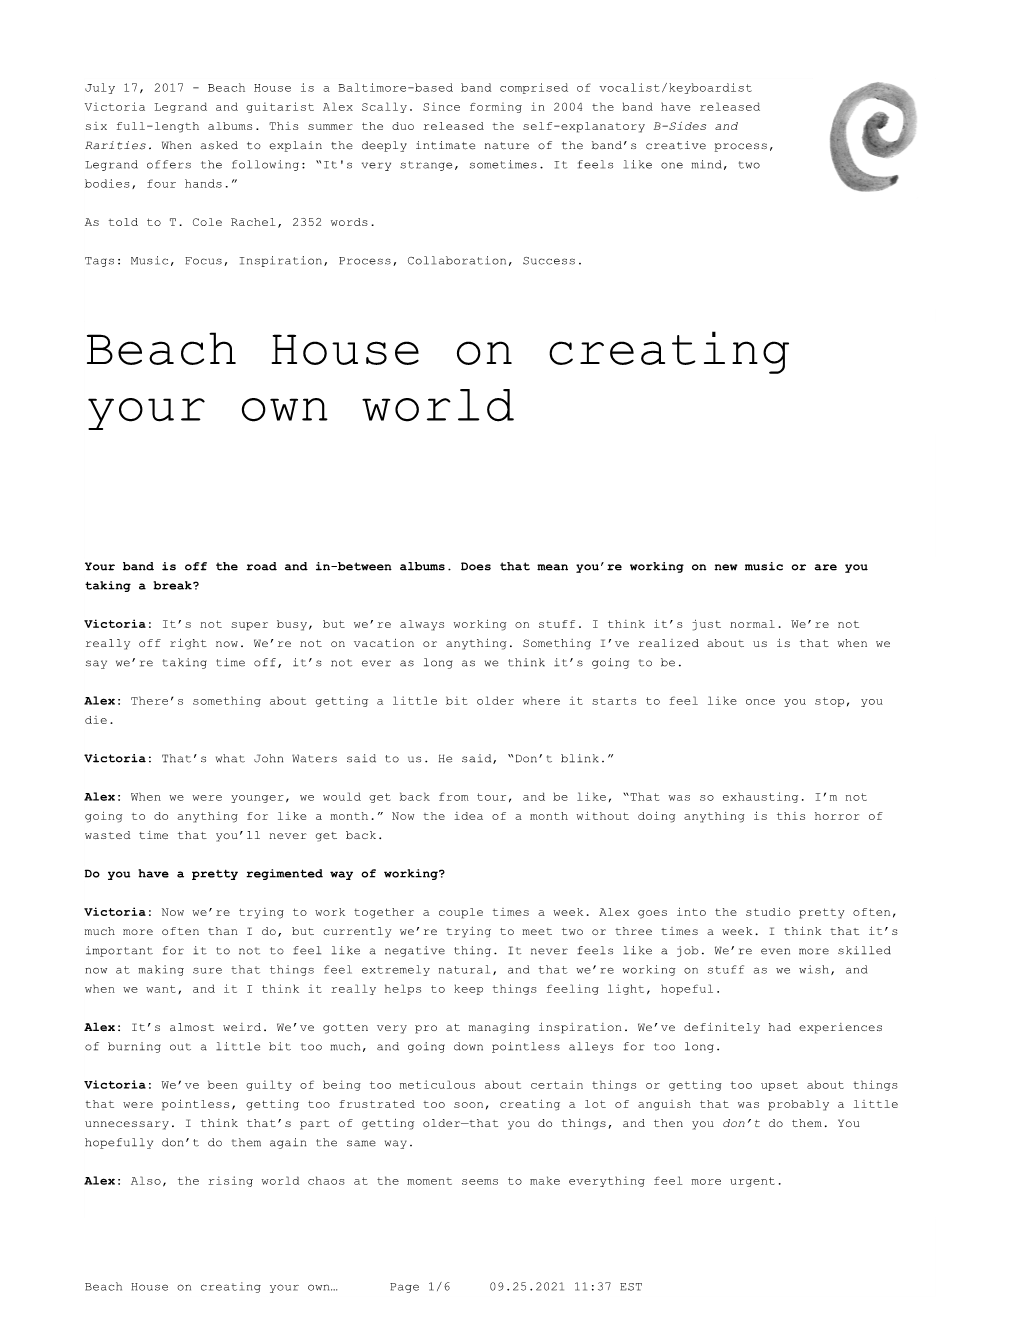 Beach House on Creating Your Own World